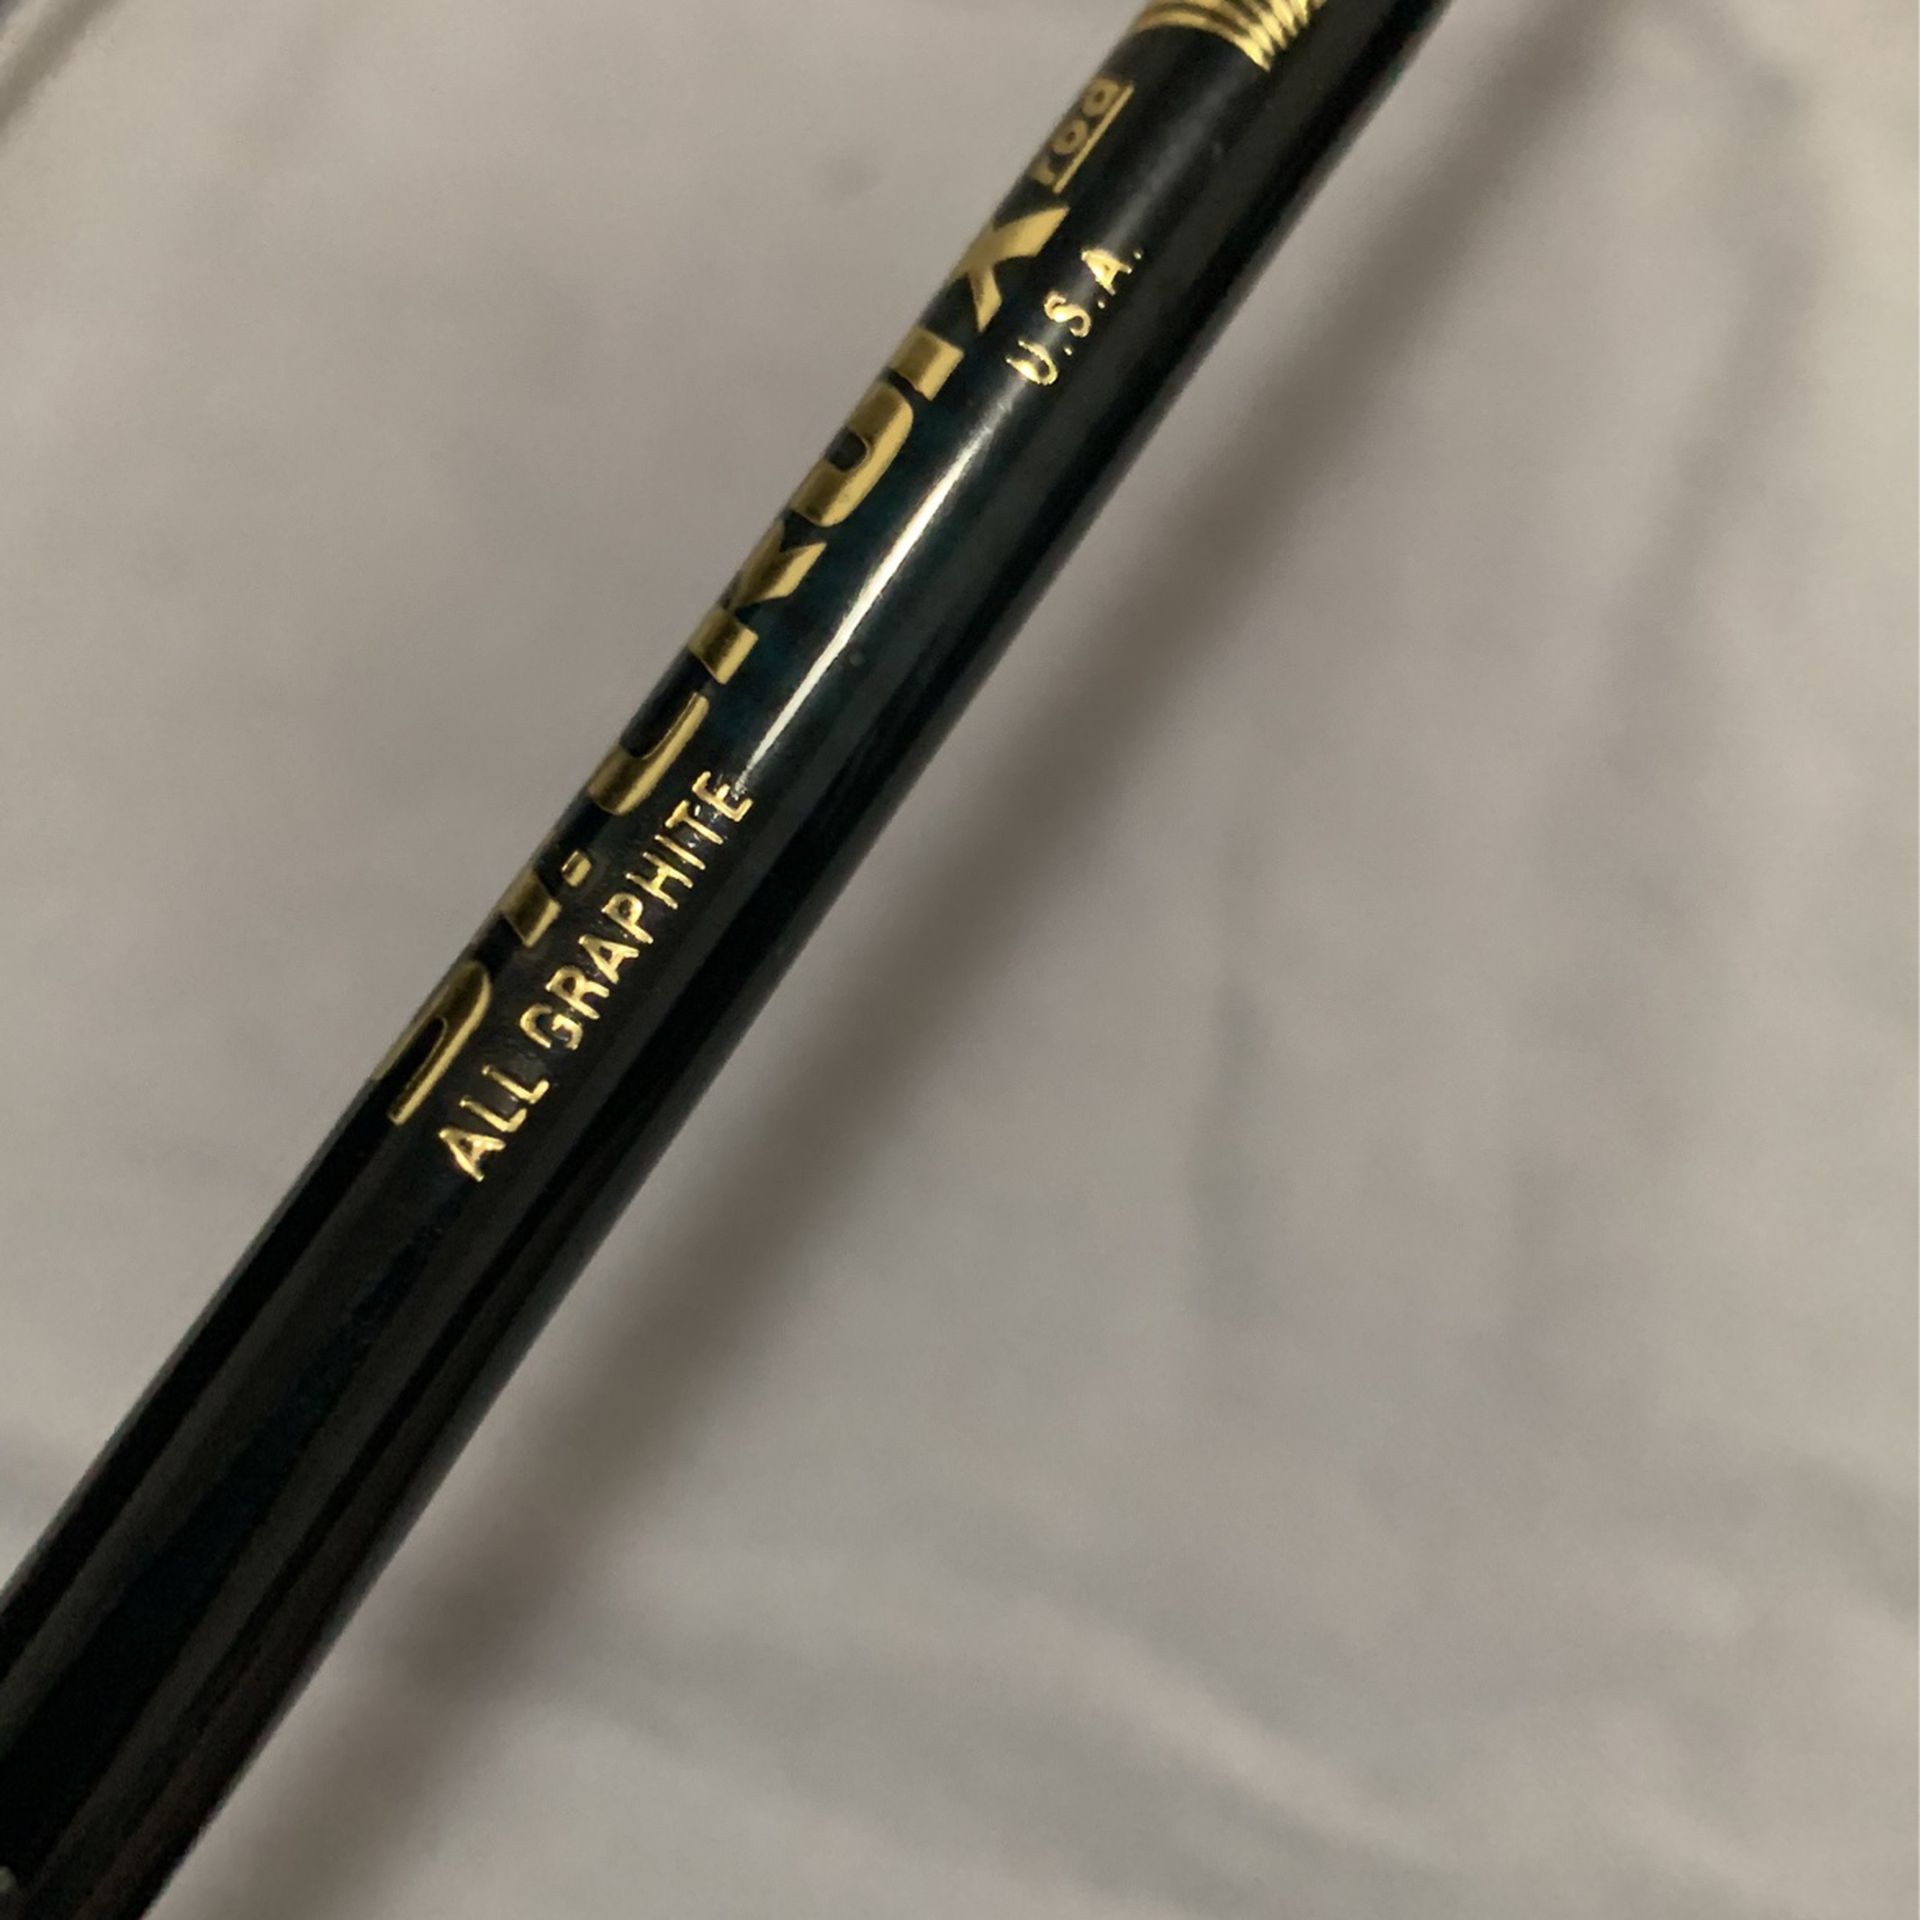 StCroix Pro Graphite Fly Rod 8'6” Line WT 5-6 for Sale in Black